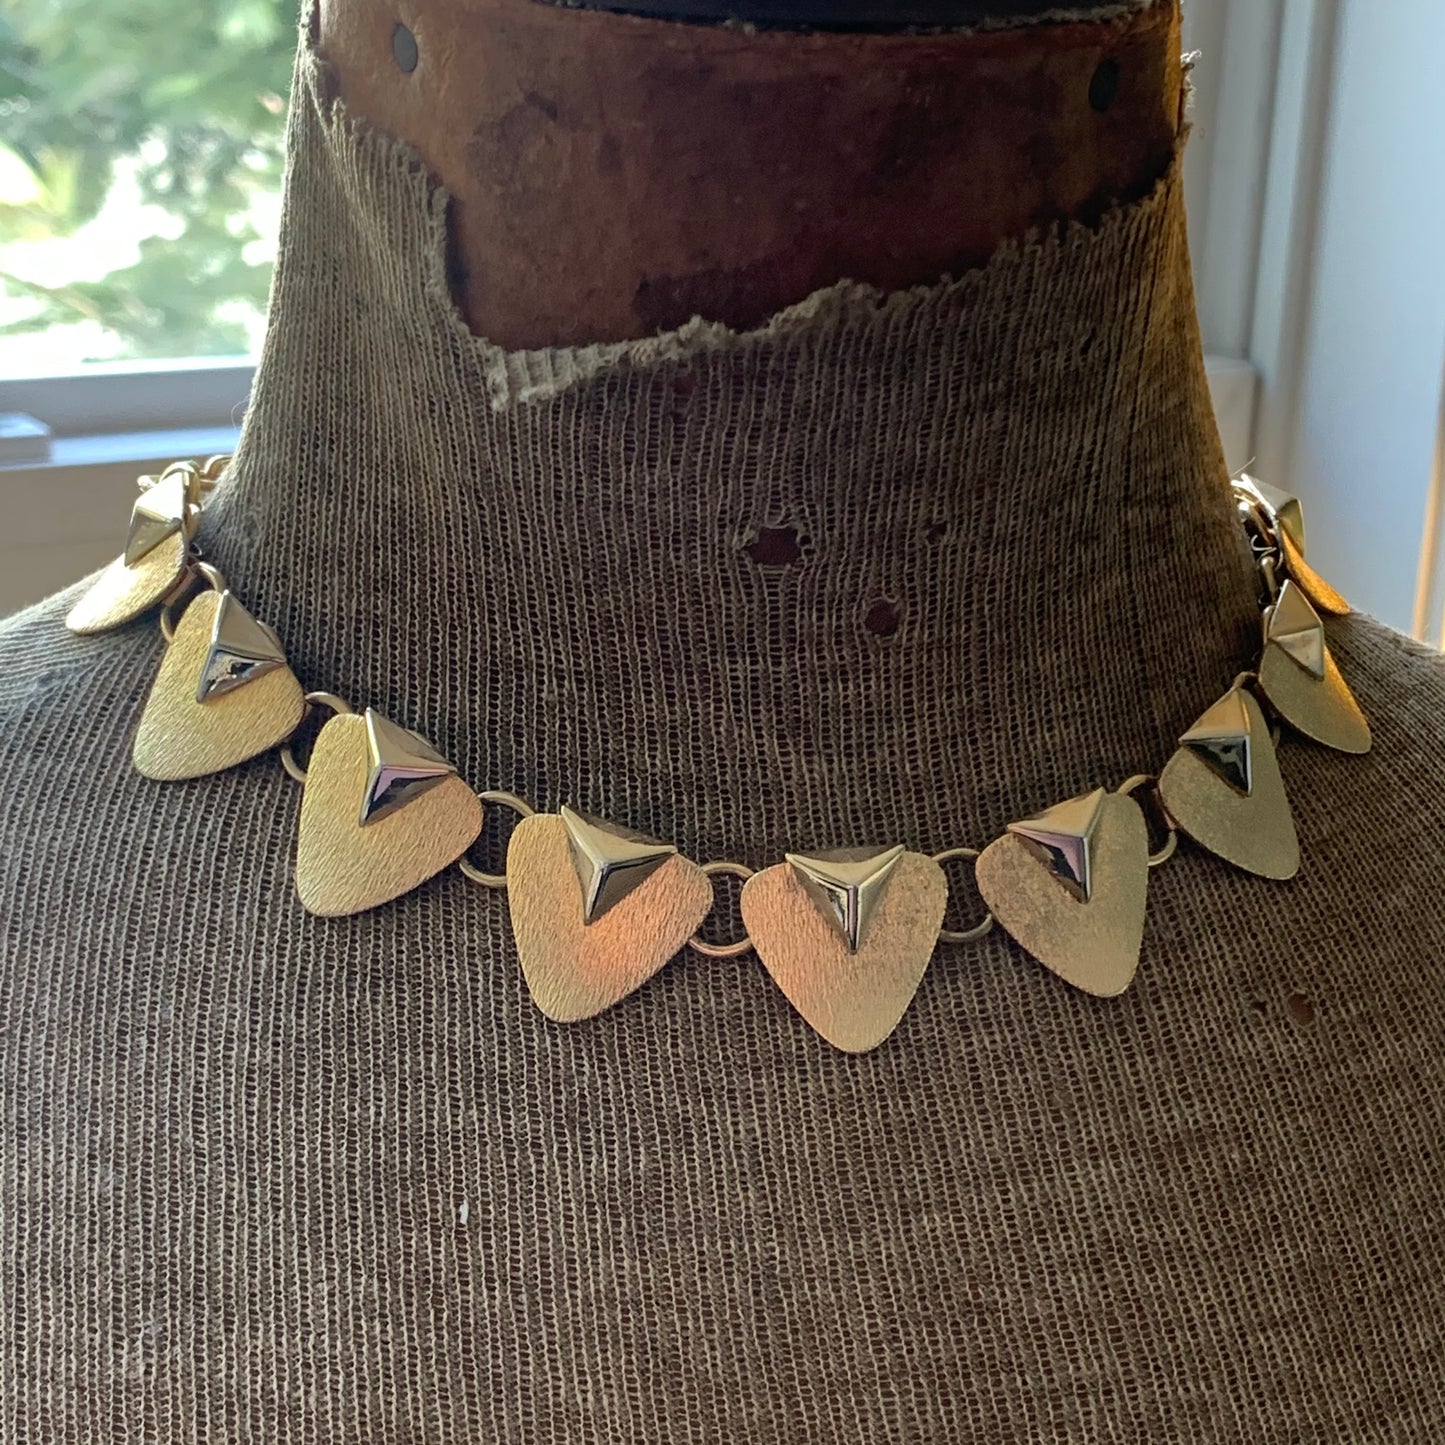 Vintage Modern Looking Egyptian Collar Necklace